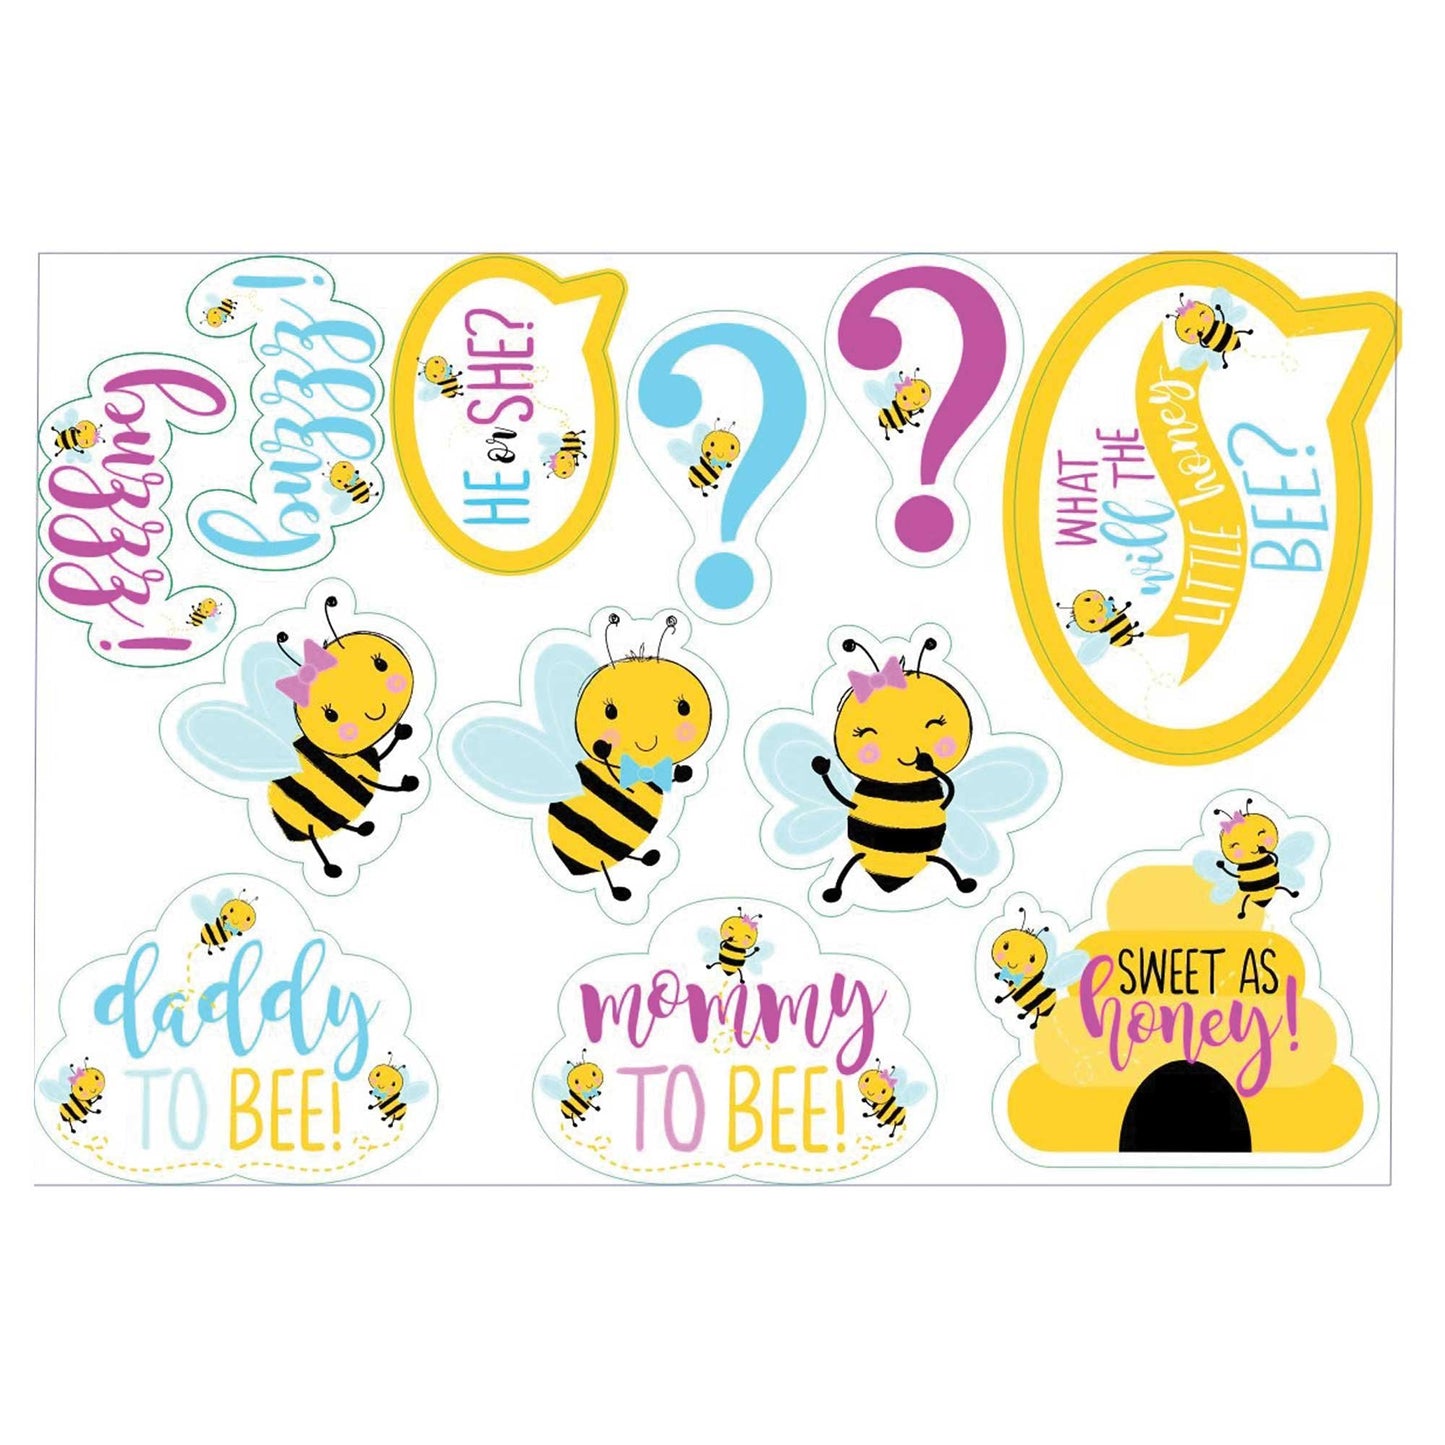 What Will it Bee? Cardboard Cutouts Assorted Shapes & Sizes